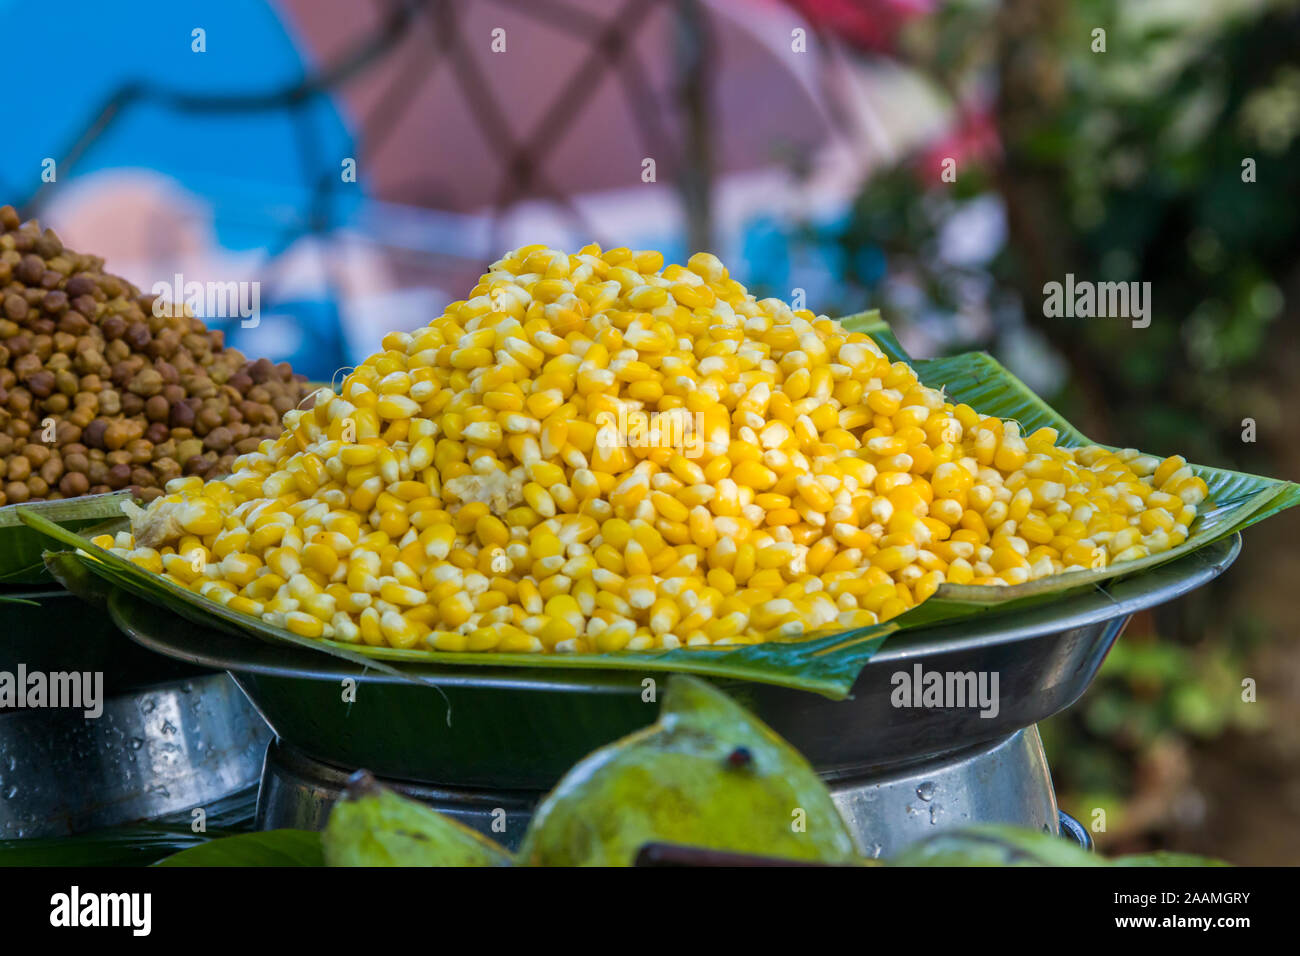 A pile of sweet corn on the food stall in Sanjay Gandhi National Park Mumbai India, which is popular street feed in india. Stock Photo